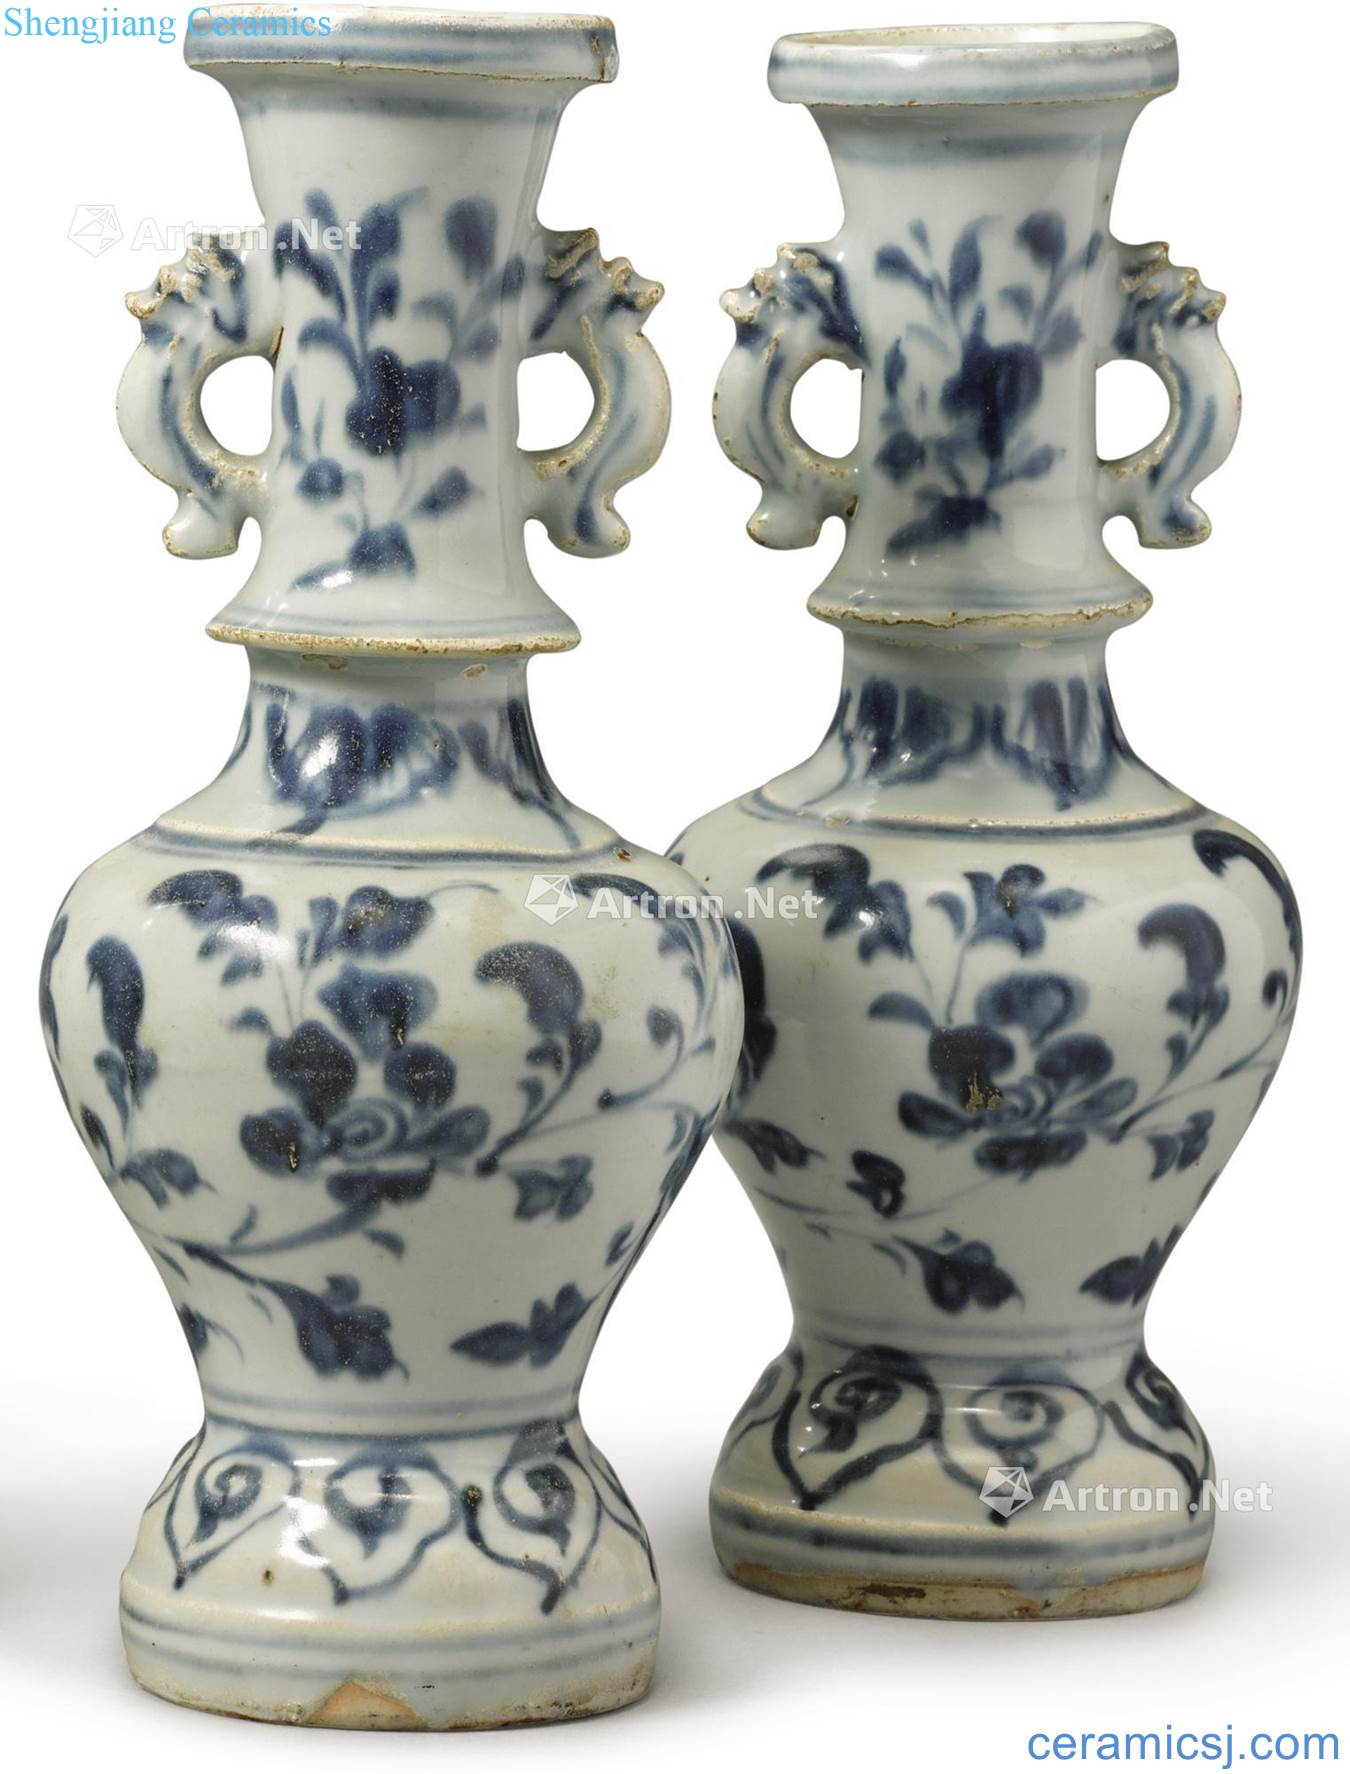 yuan Blue and white flowers around branches grain ears bottle (a)